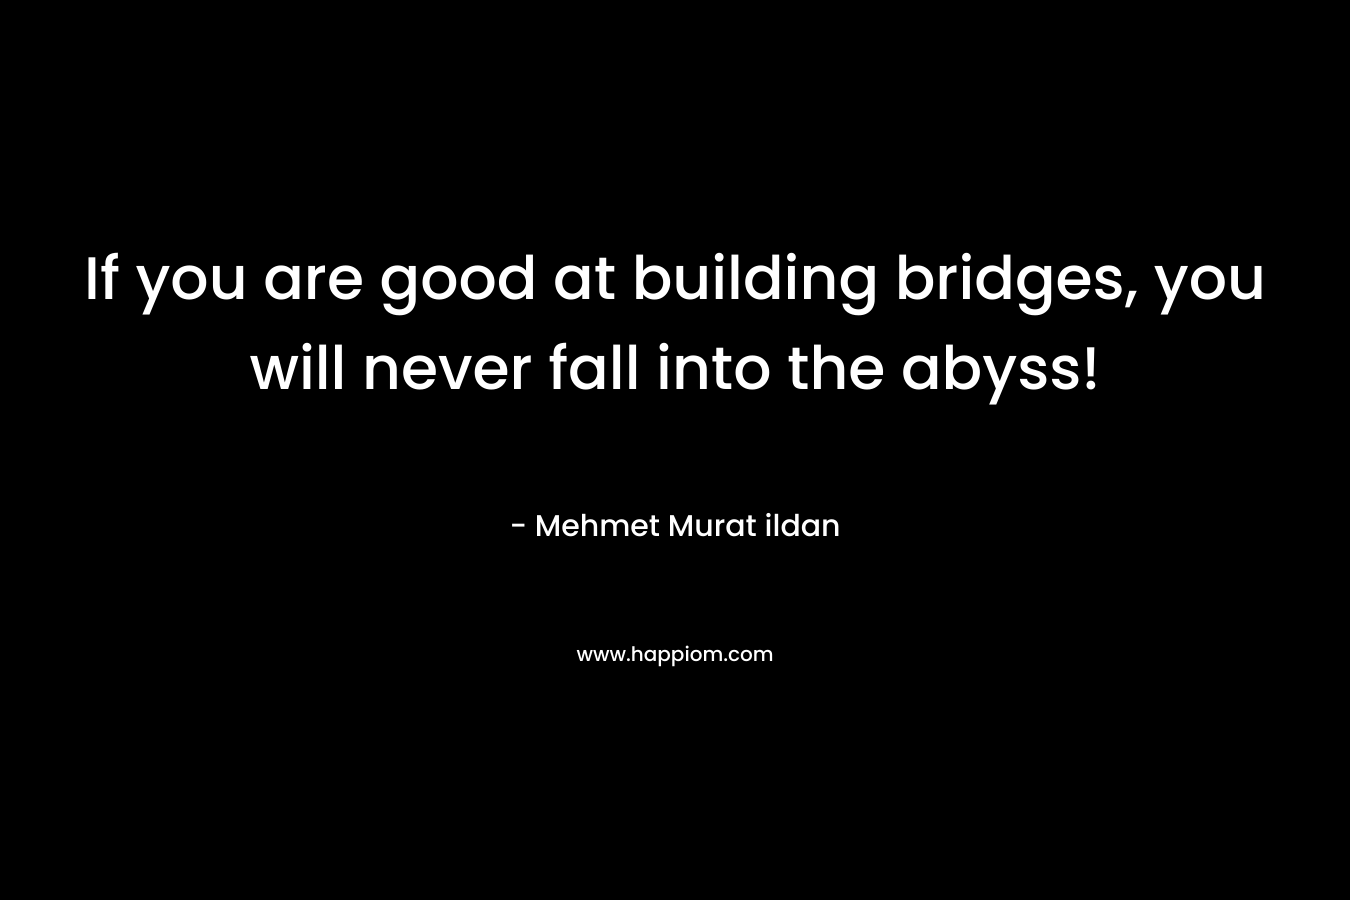 If you are good at building bridges, you will never fall into the abyss! – Mehmet Murat ildan